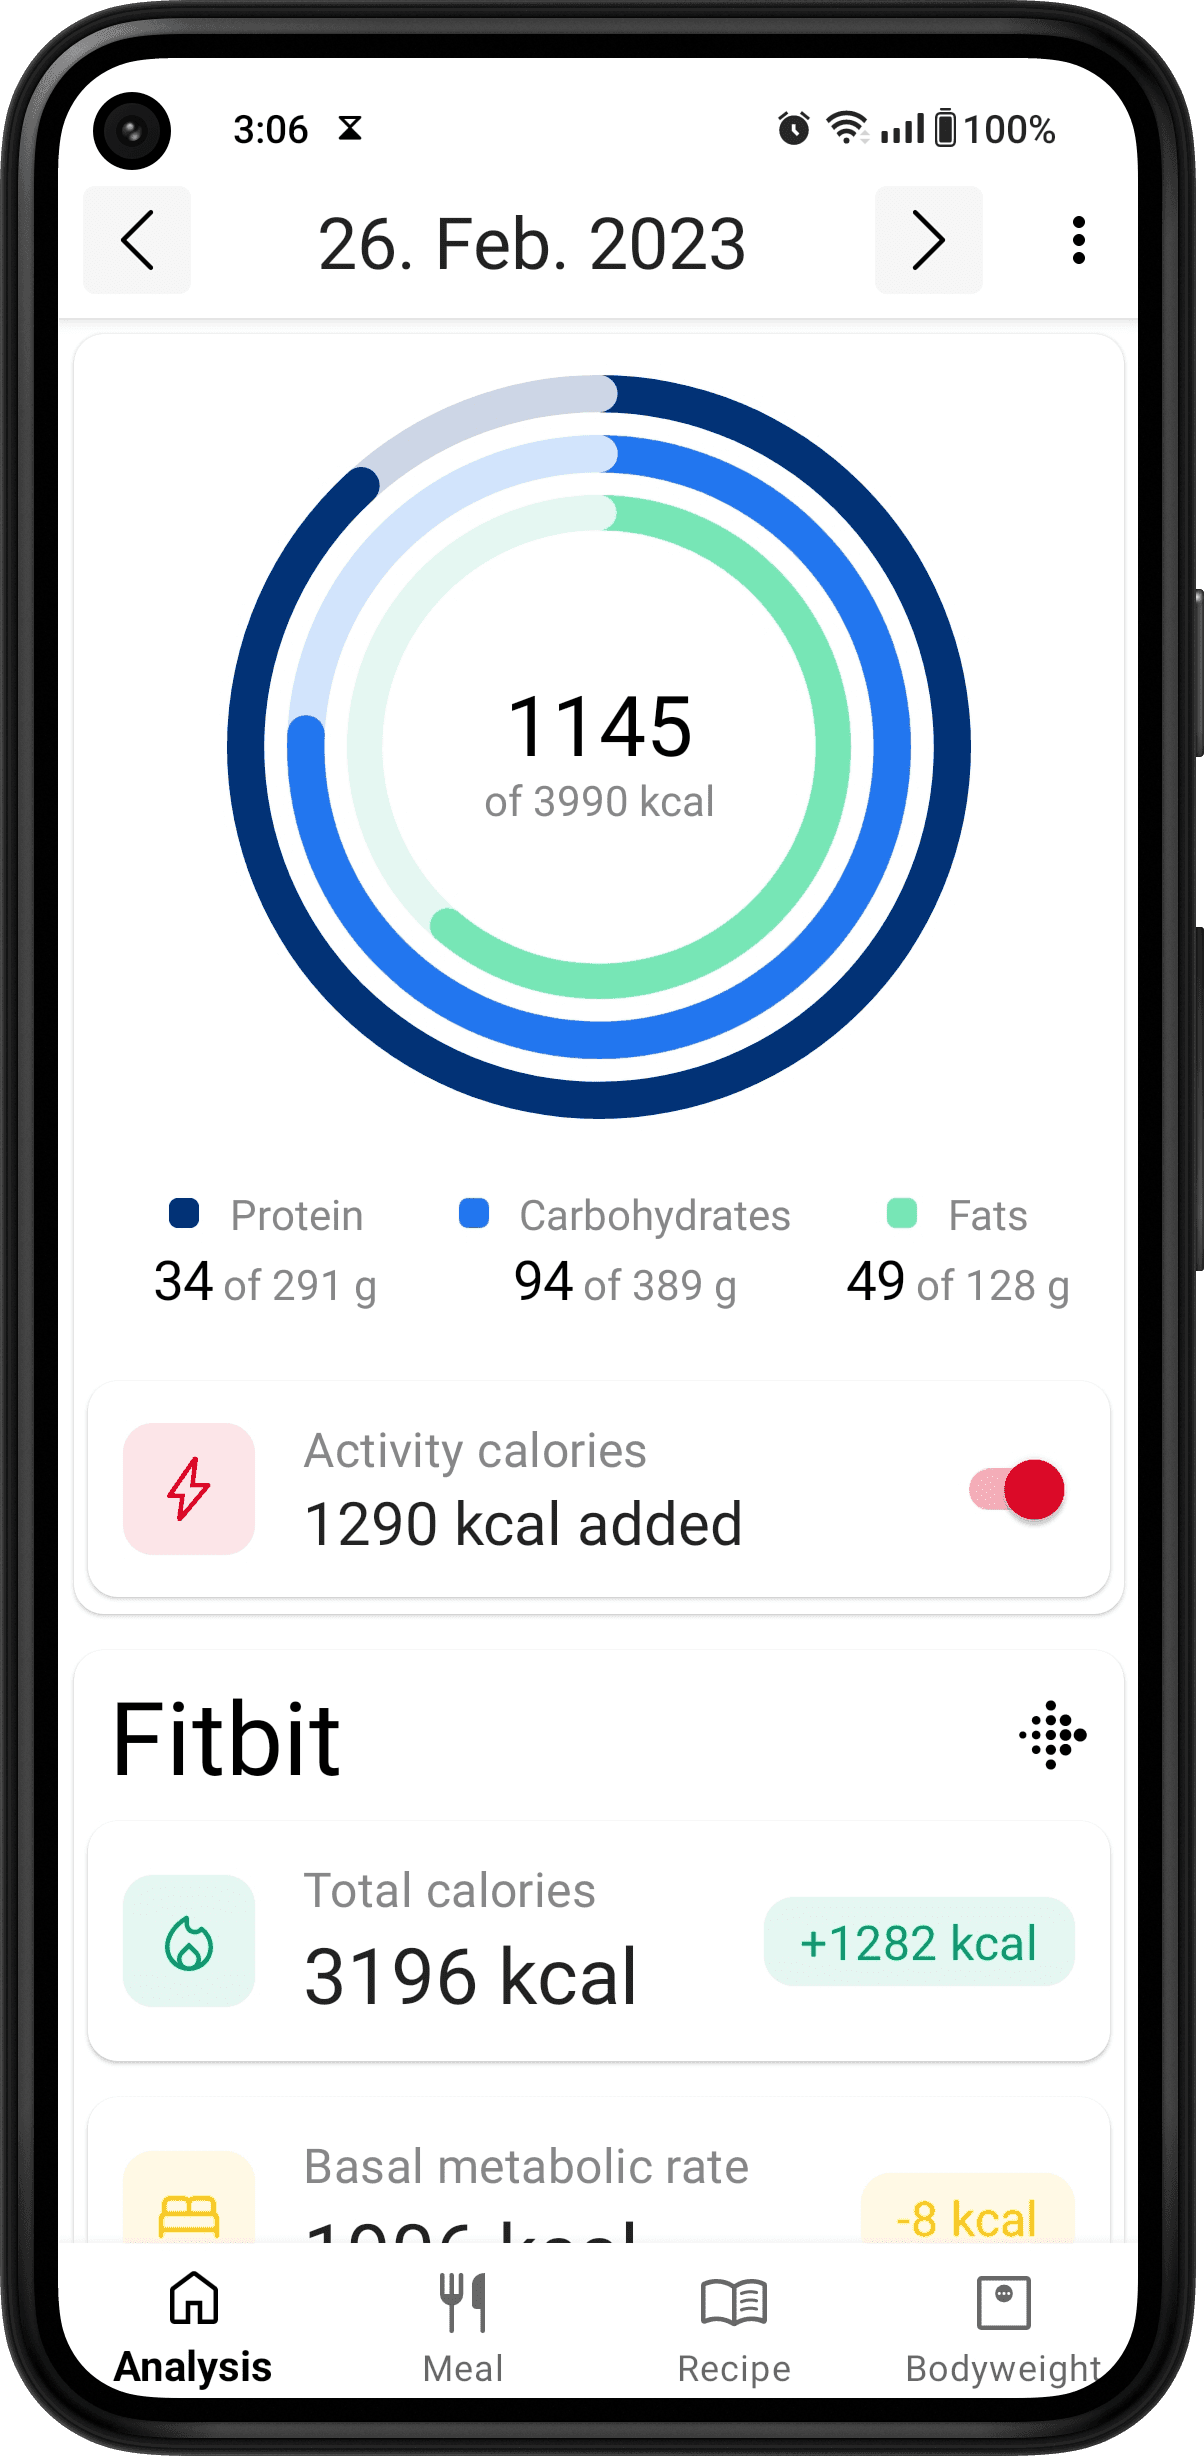 How do I sync my Fitbit with calorie counter?